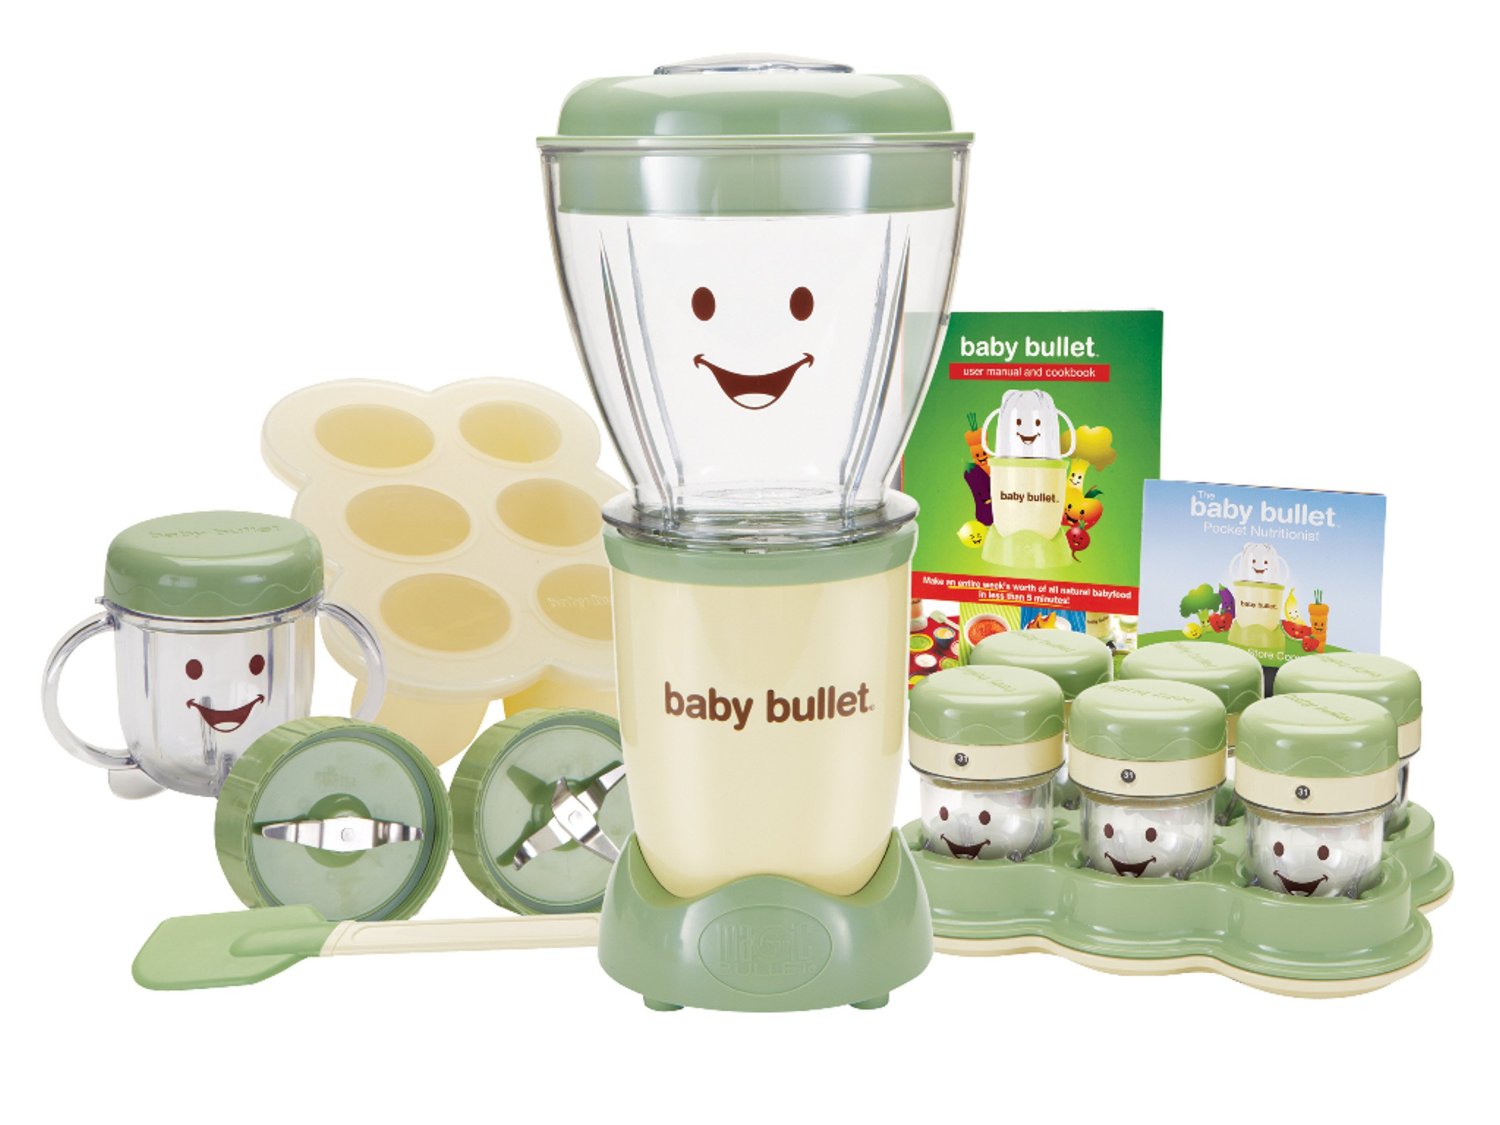 Baby Bullet: Making your Baby’s Food Nutritious and Tasty